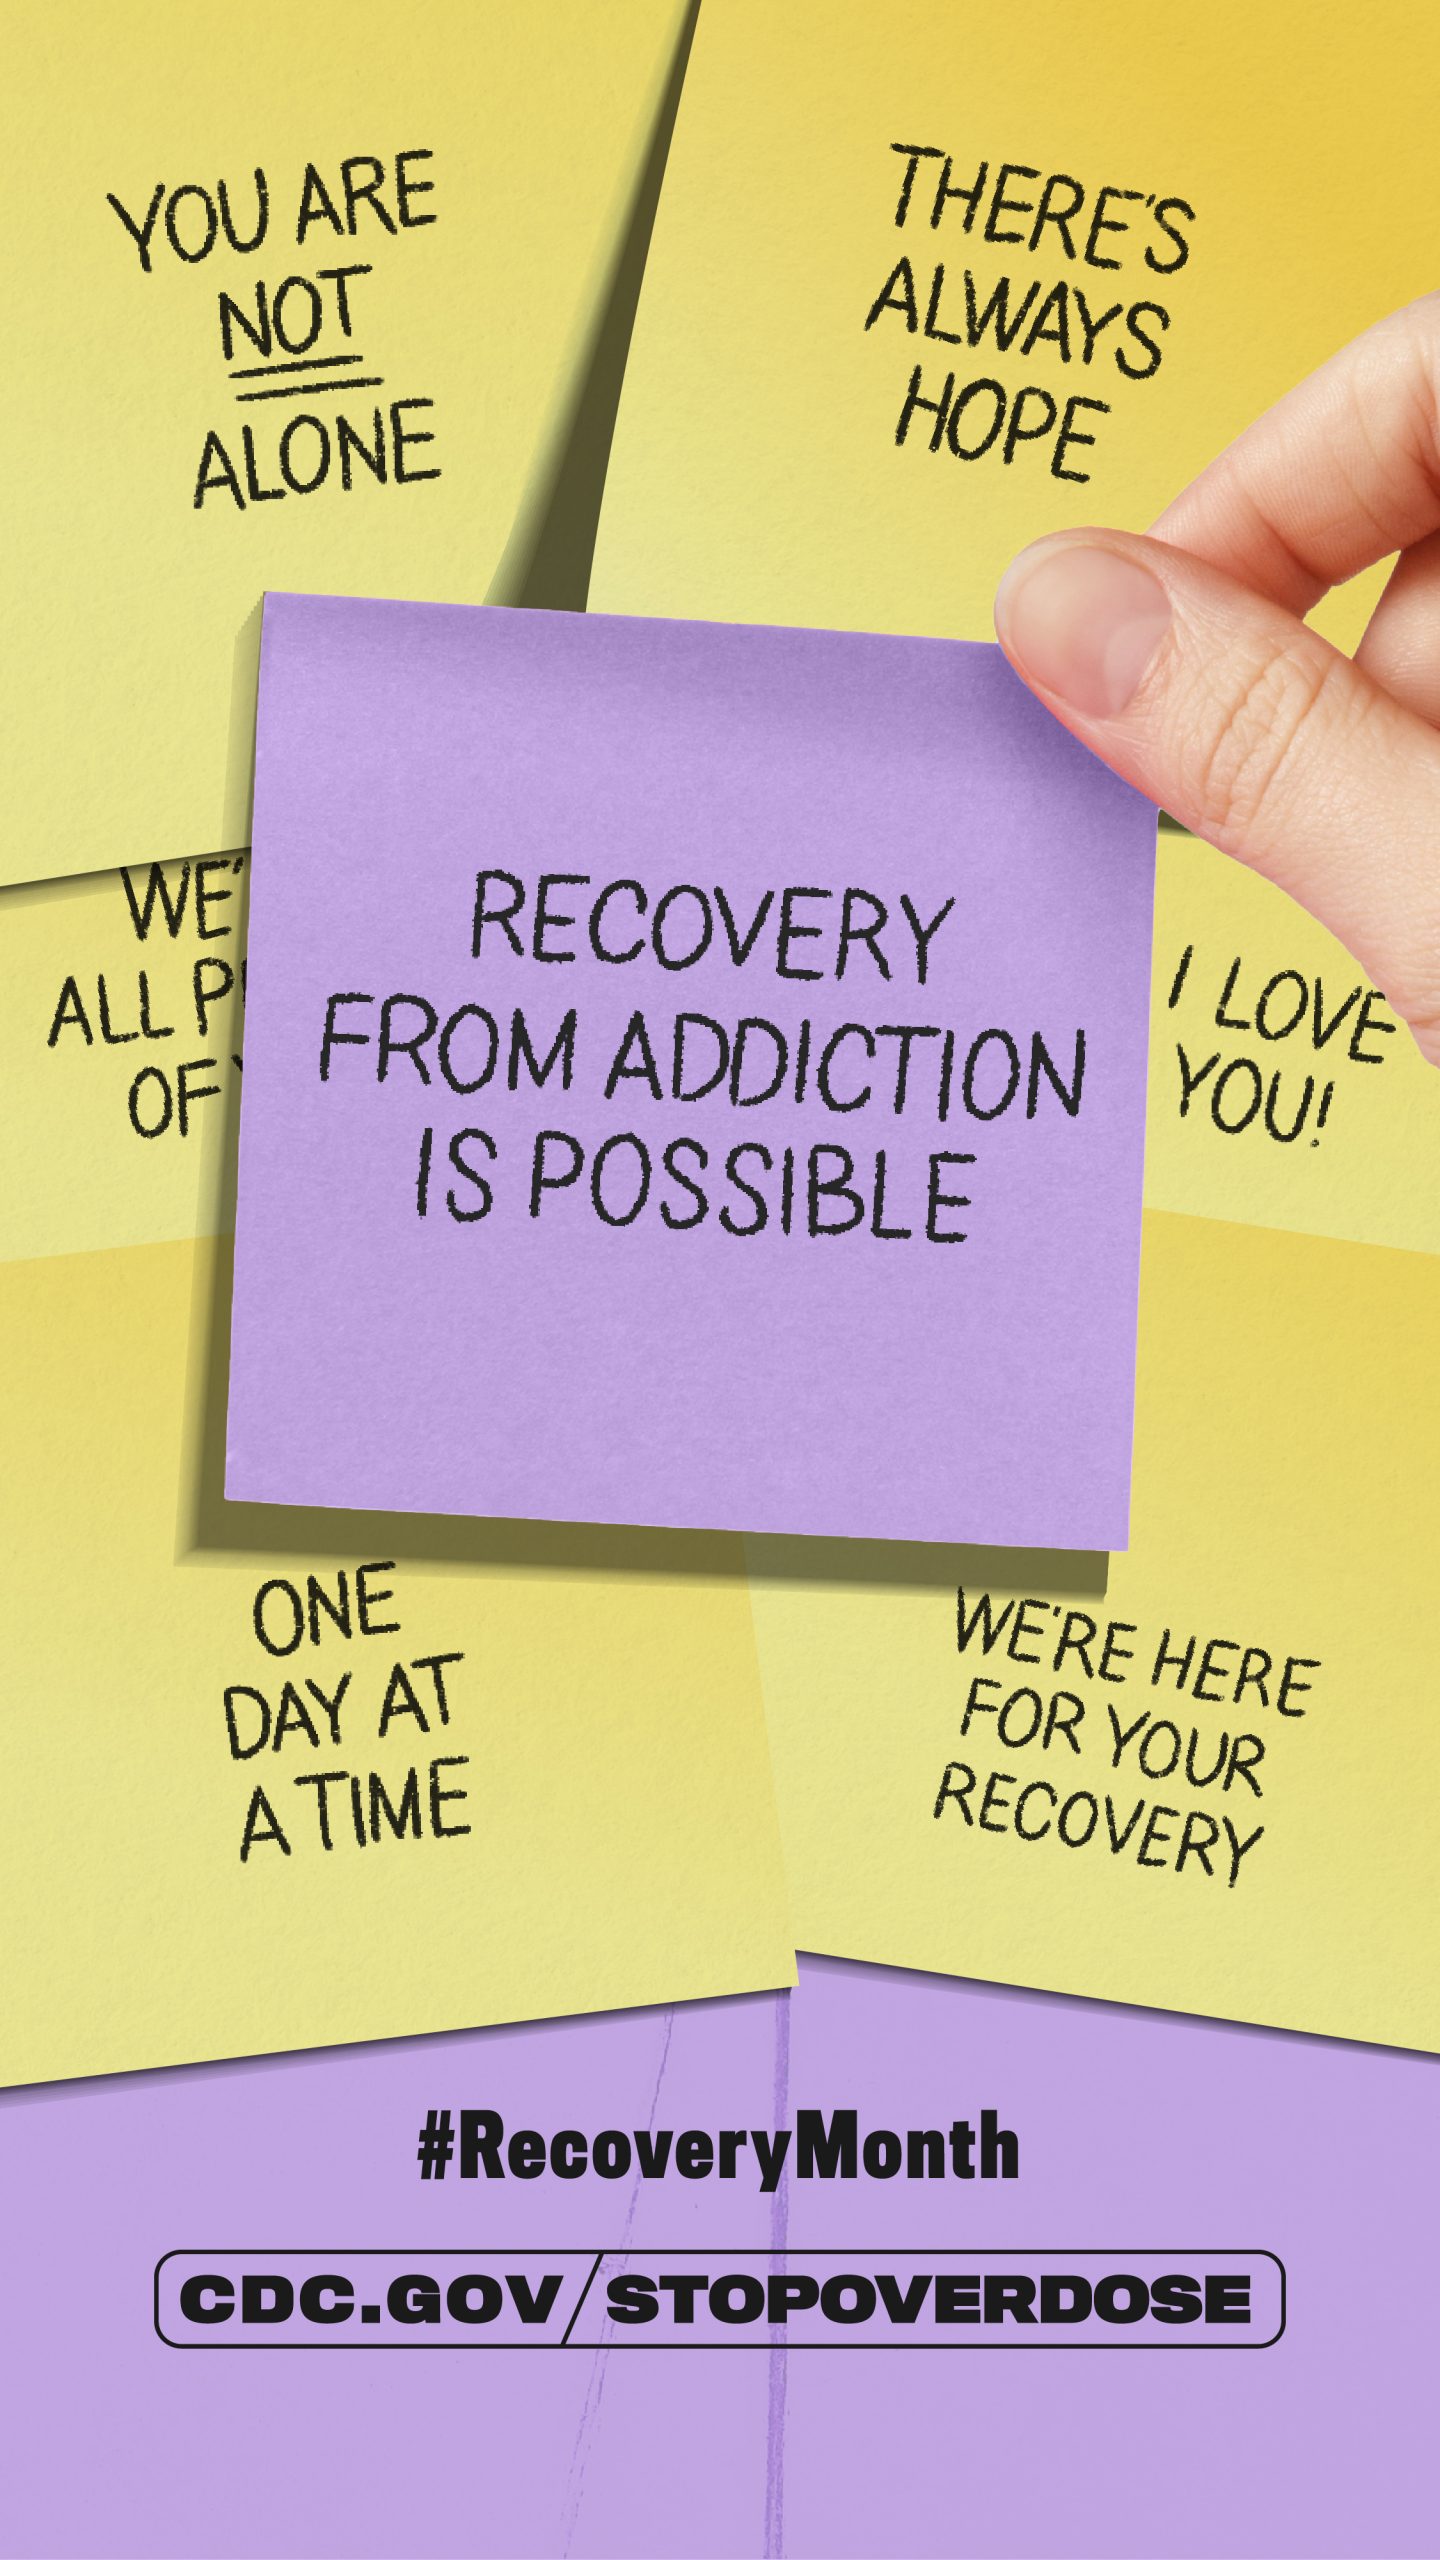 Recovery from addiction is possible.